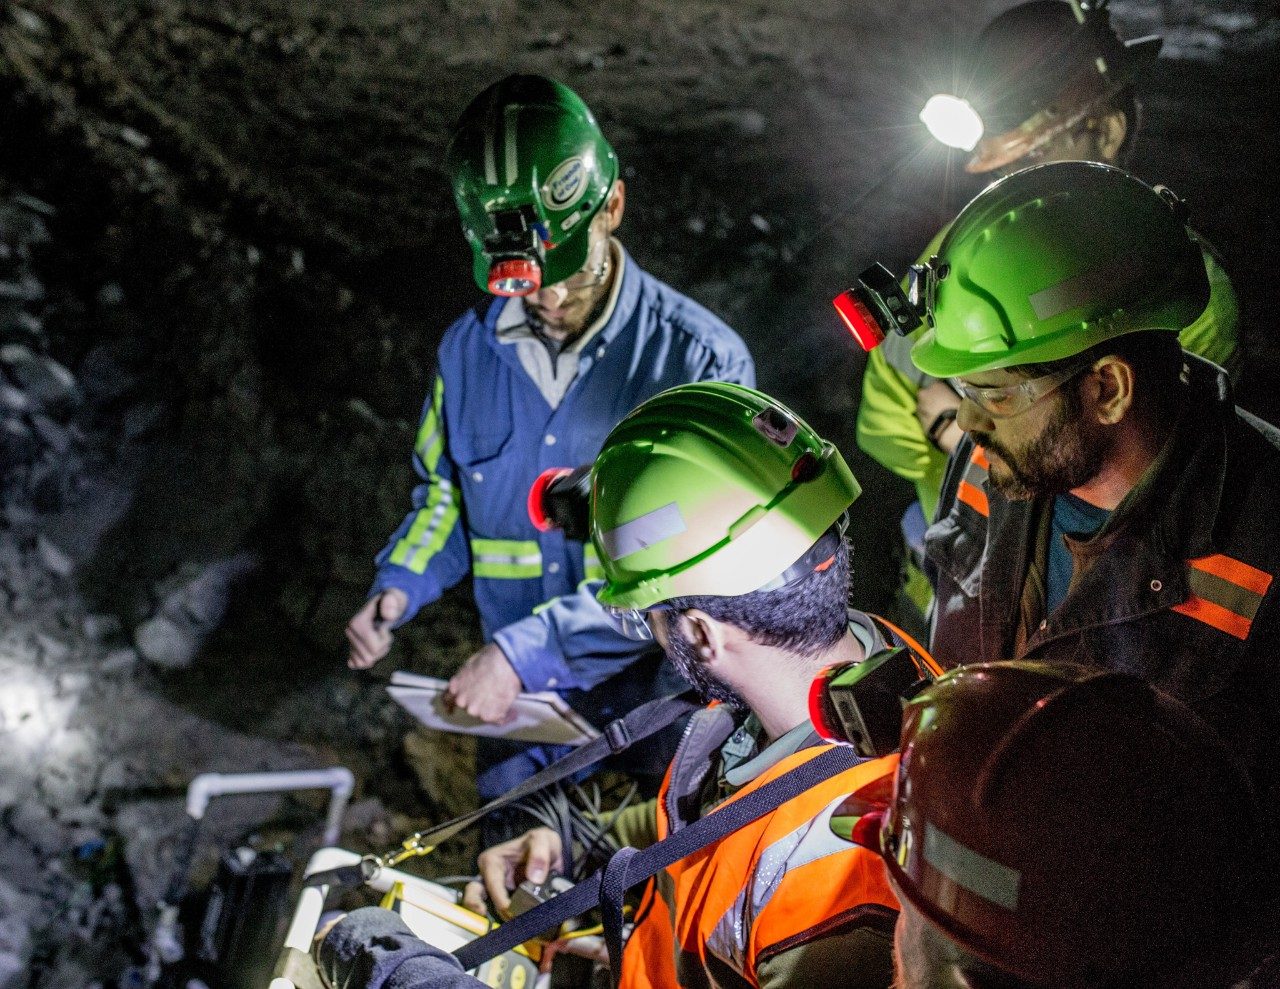 The combined efforts of the graduate student research aims to improve safety conditions in underground stone mines.